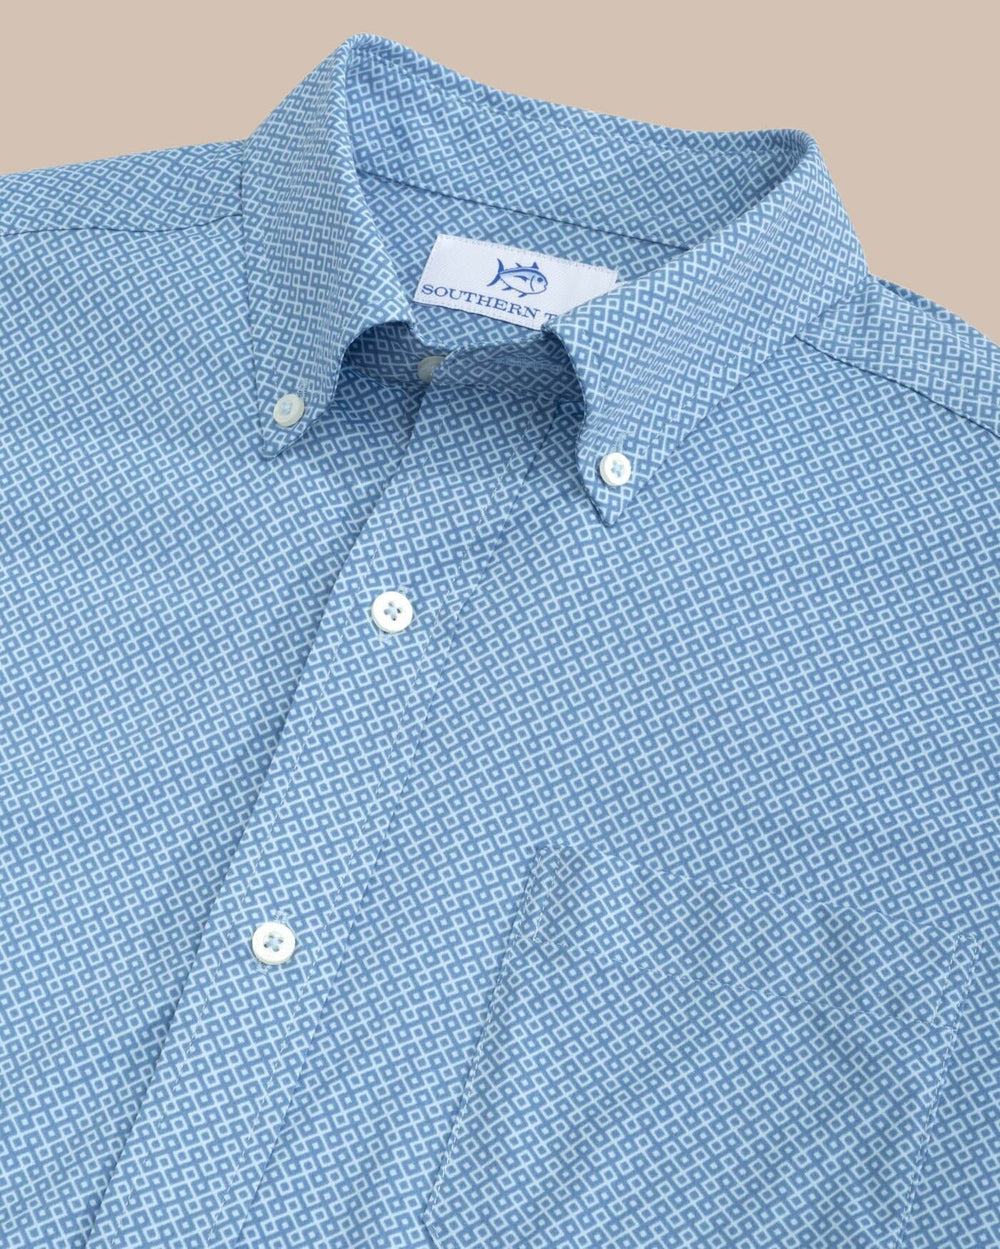 The detail view of the Southern Tide brrr Intercoastal Retro Geo Short Sleeve Sportshirt by Southern Tide - Coronet Blue